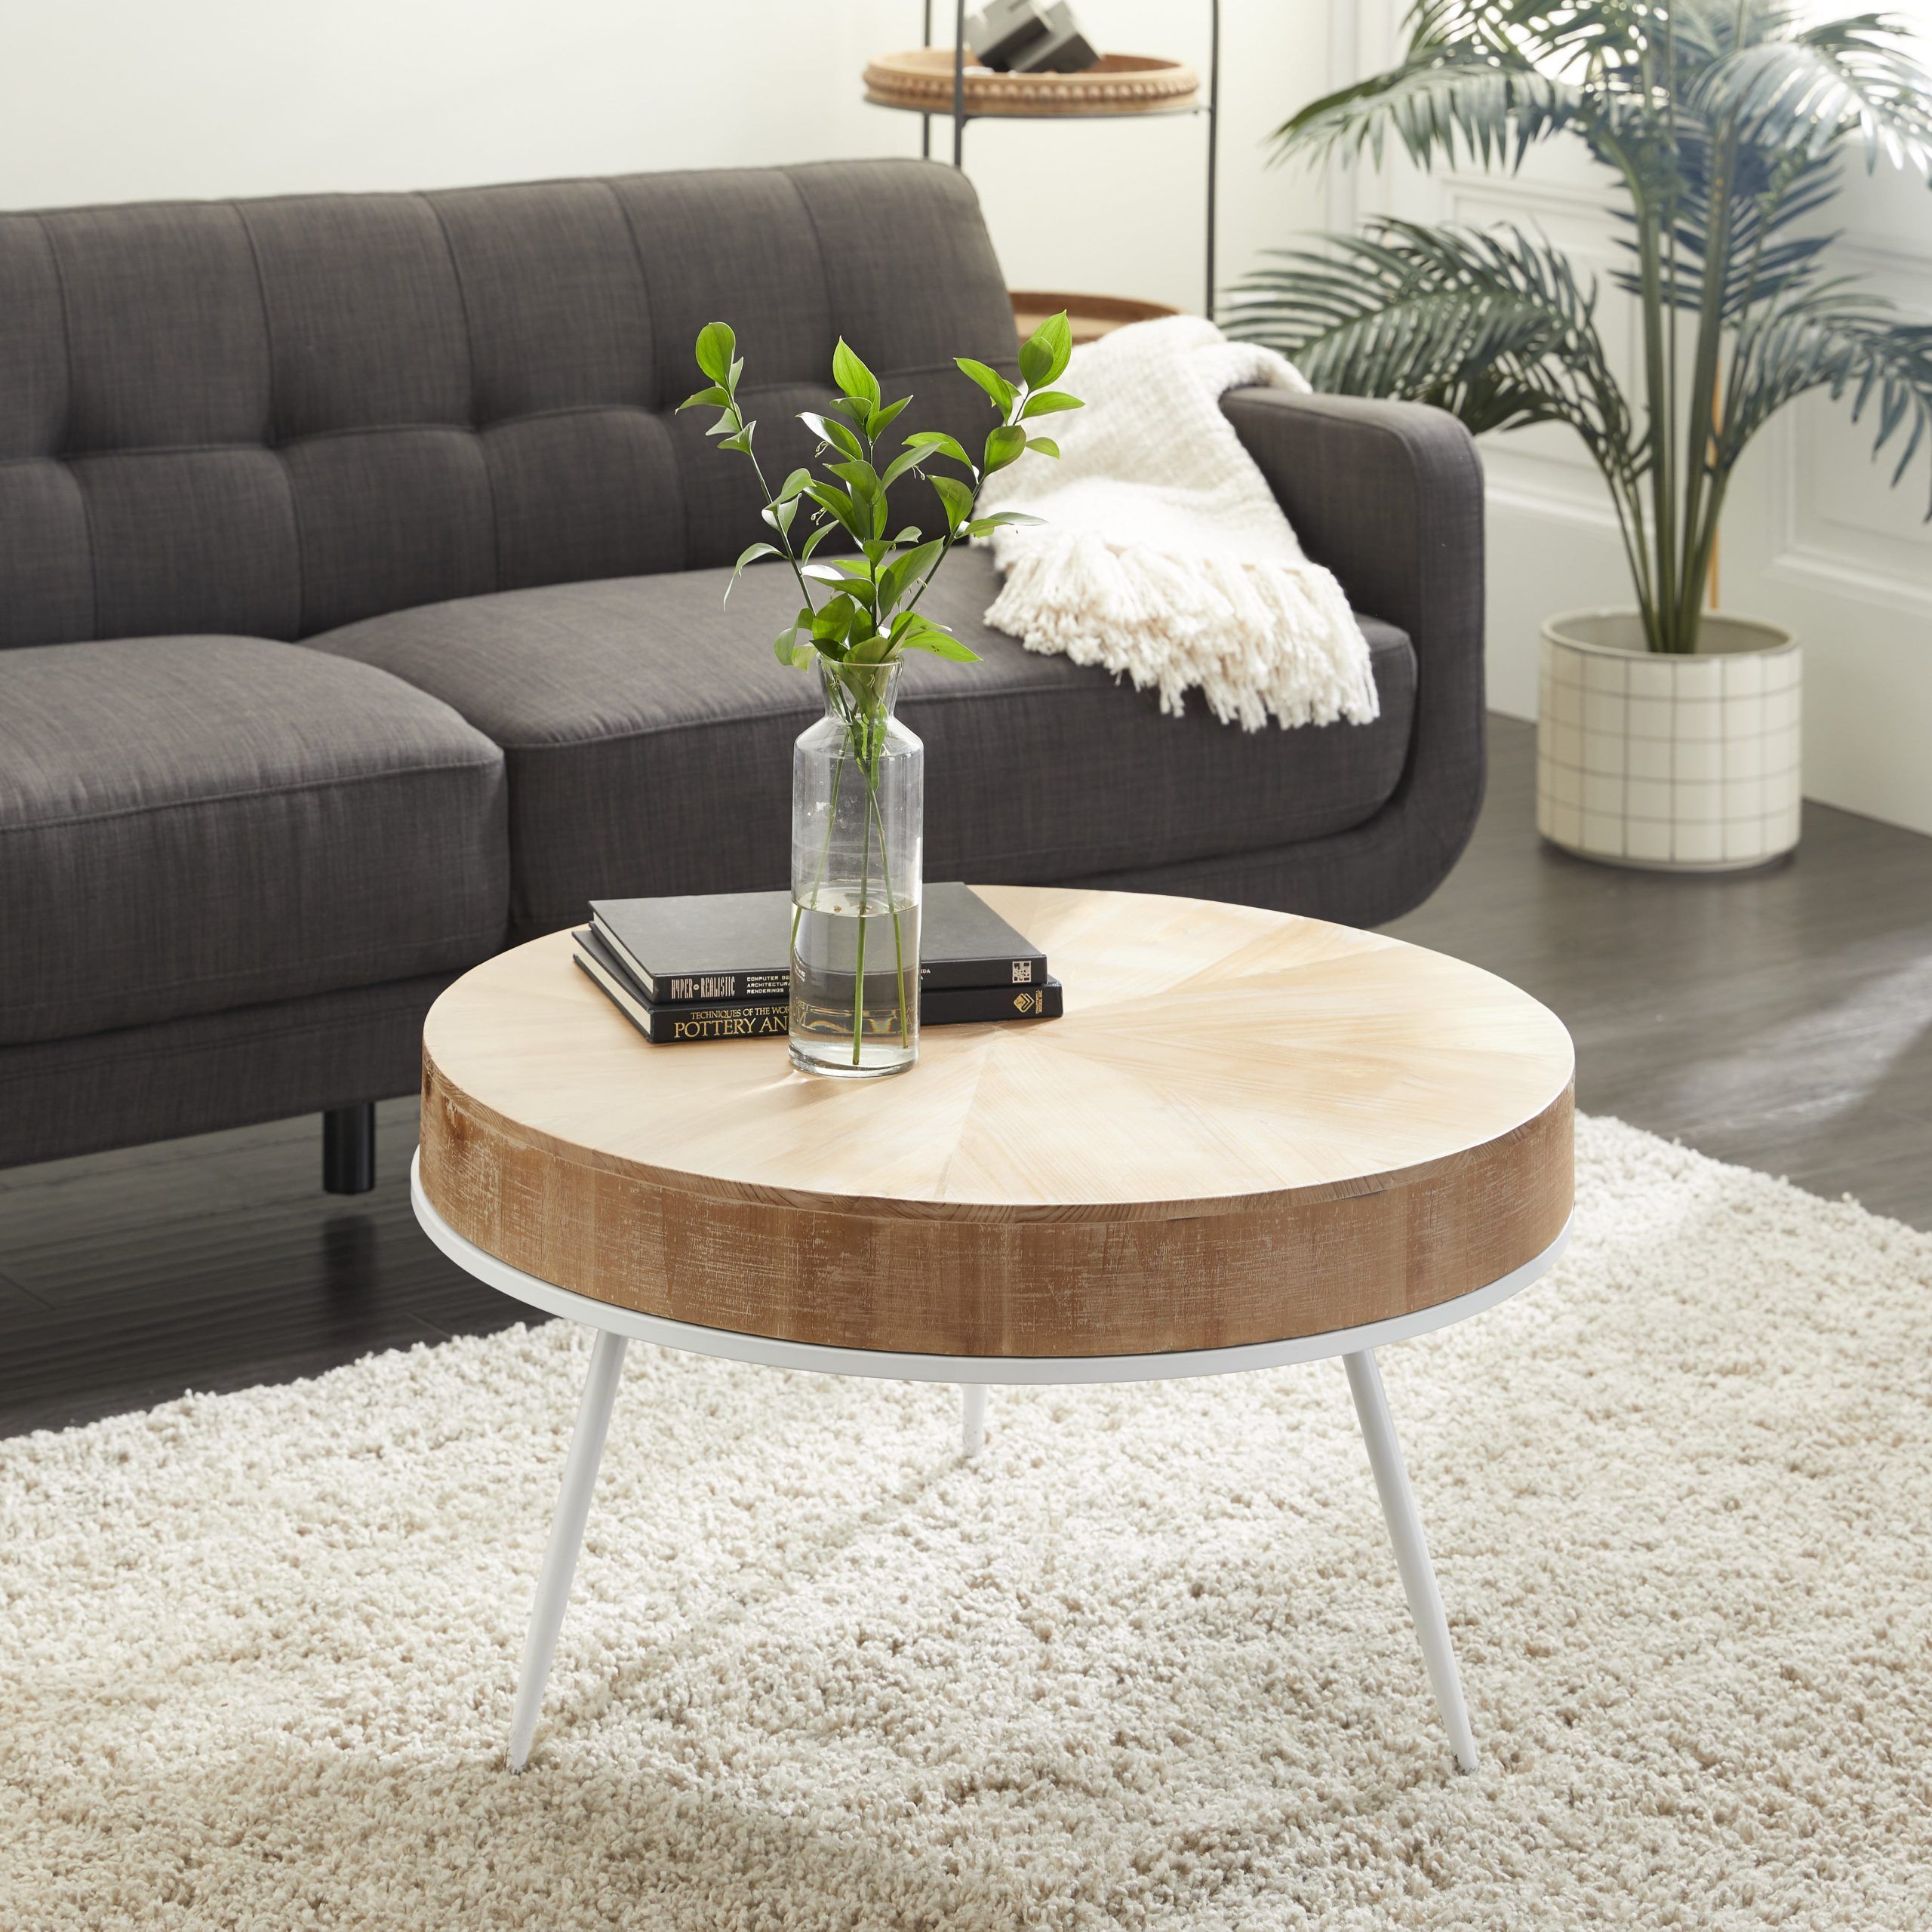 Decmode Round Natural Wood Top Coffee Table With Distressed White Metal Inside Coffee Tables With Round Wooden Tops (Gallery 1 of 20)